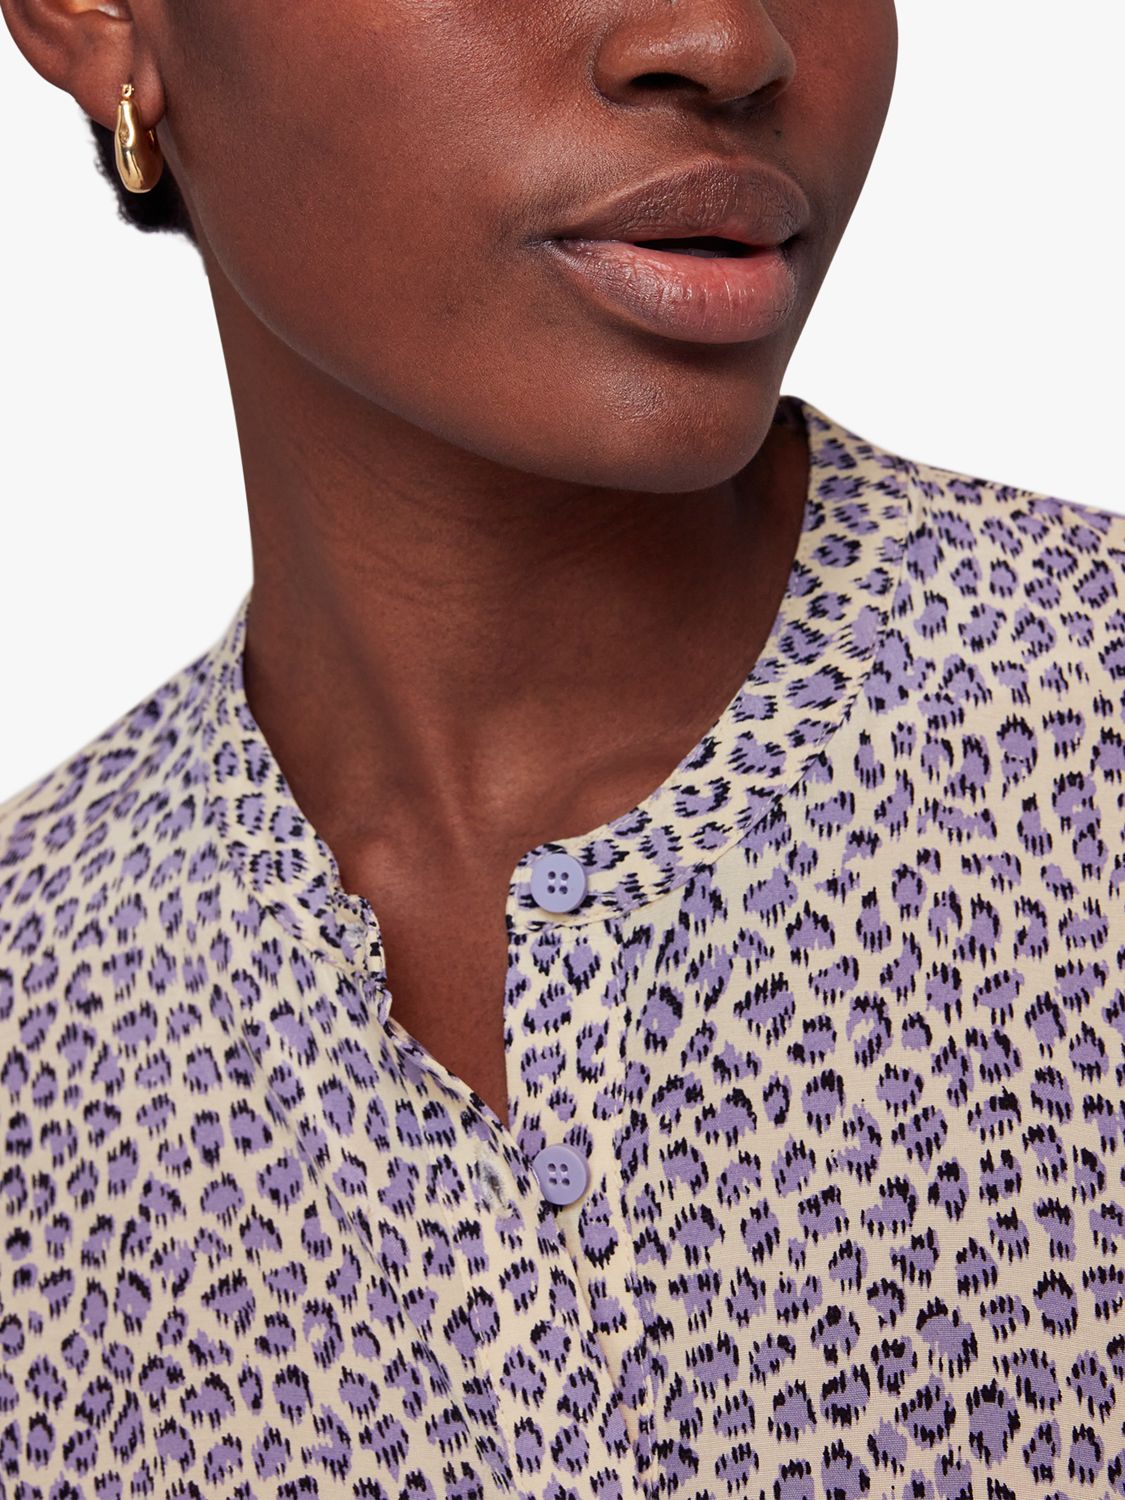 Buy Whistles Dashed Leopard Print Midi Dress, Lilac/Multi Online at johnlewis.com